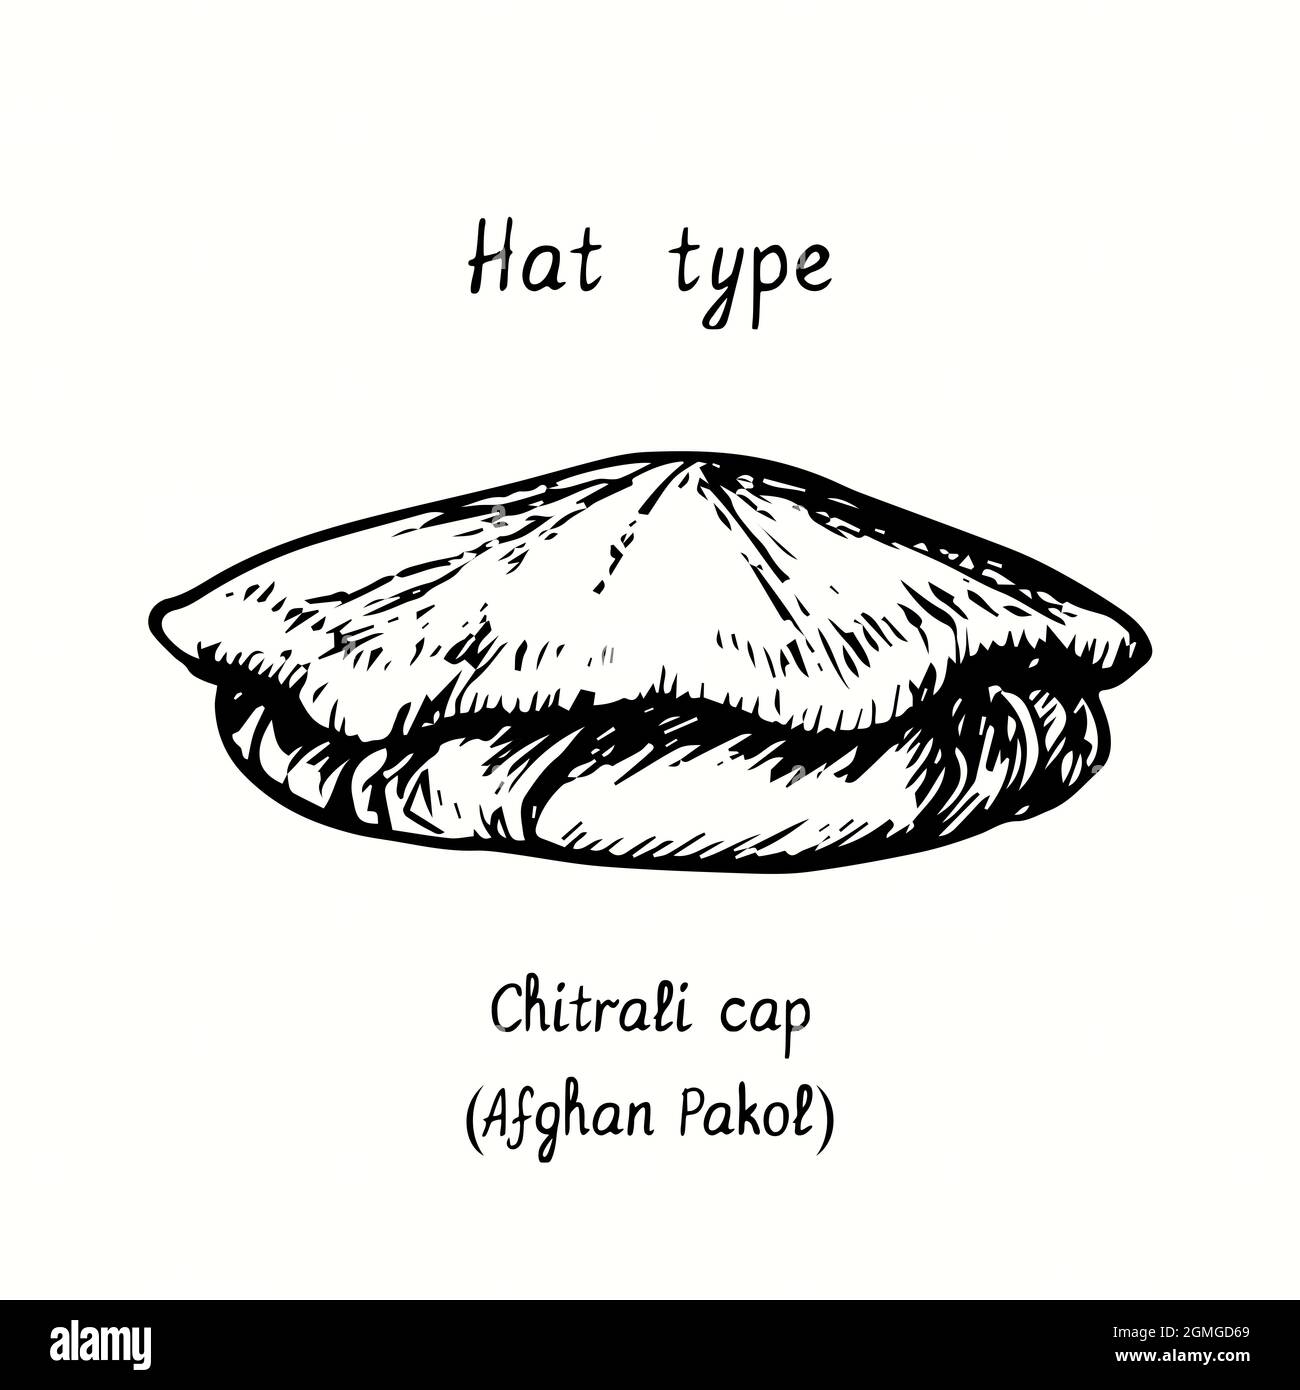 Hat type, Chitrali cap or Afghan pakol. Ink black and white drawing outline illustration Stock Photo